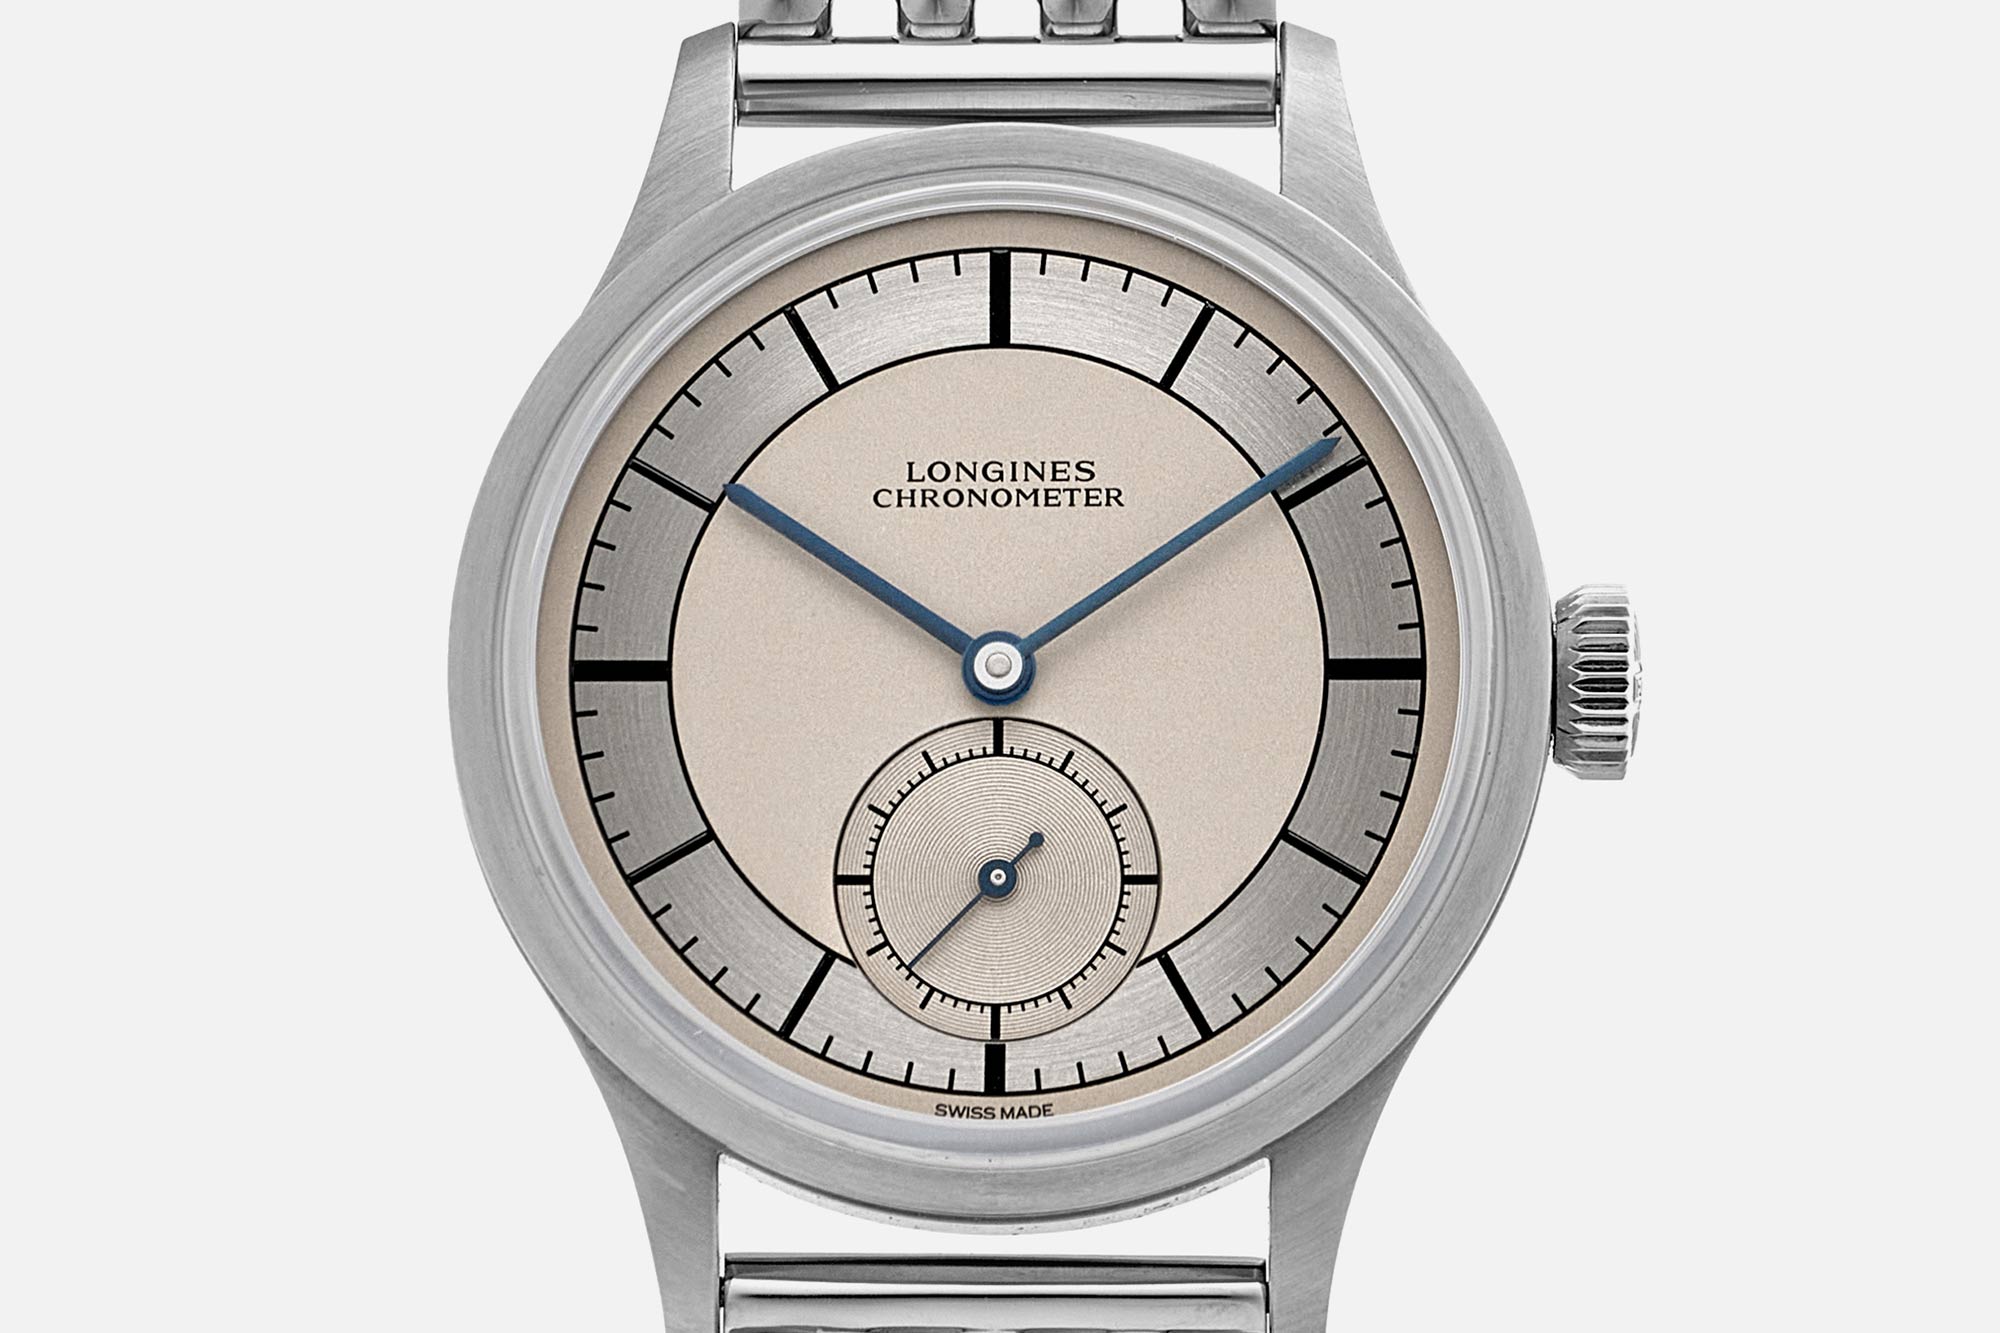 Hodinkee and Longines Collaborate on a Stripped Down Sector Dial